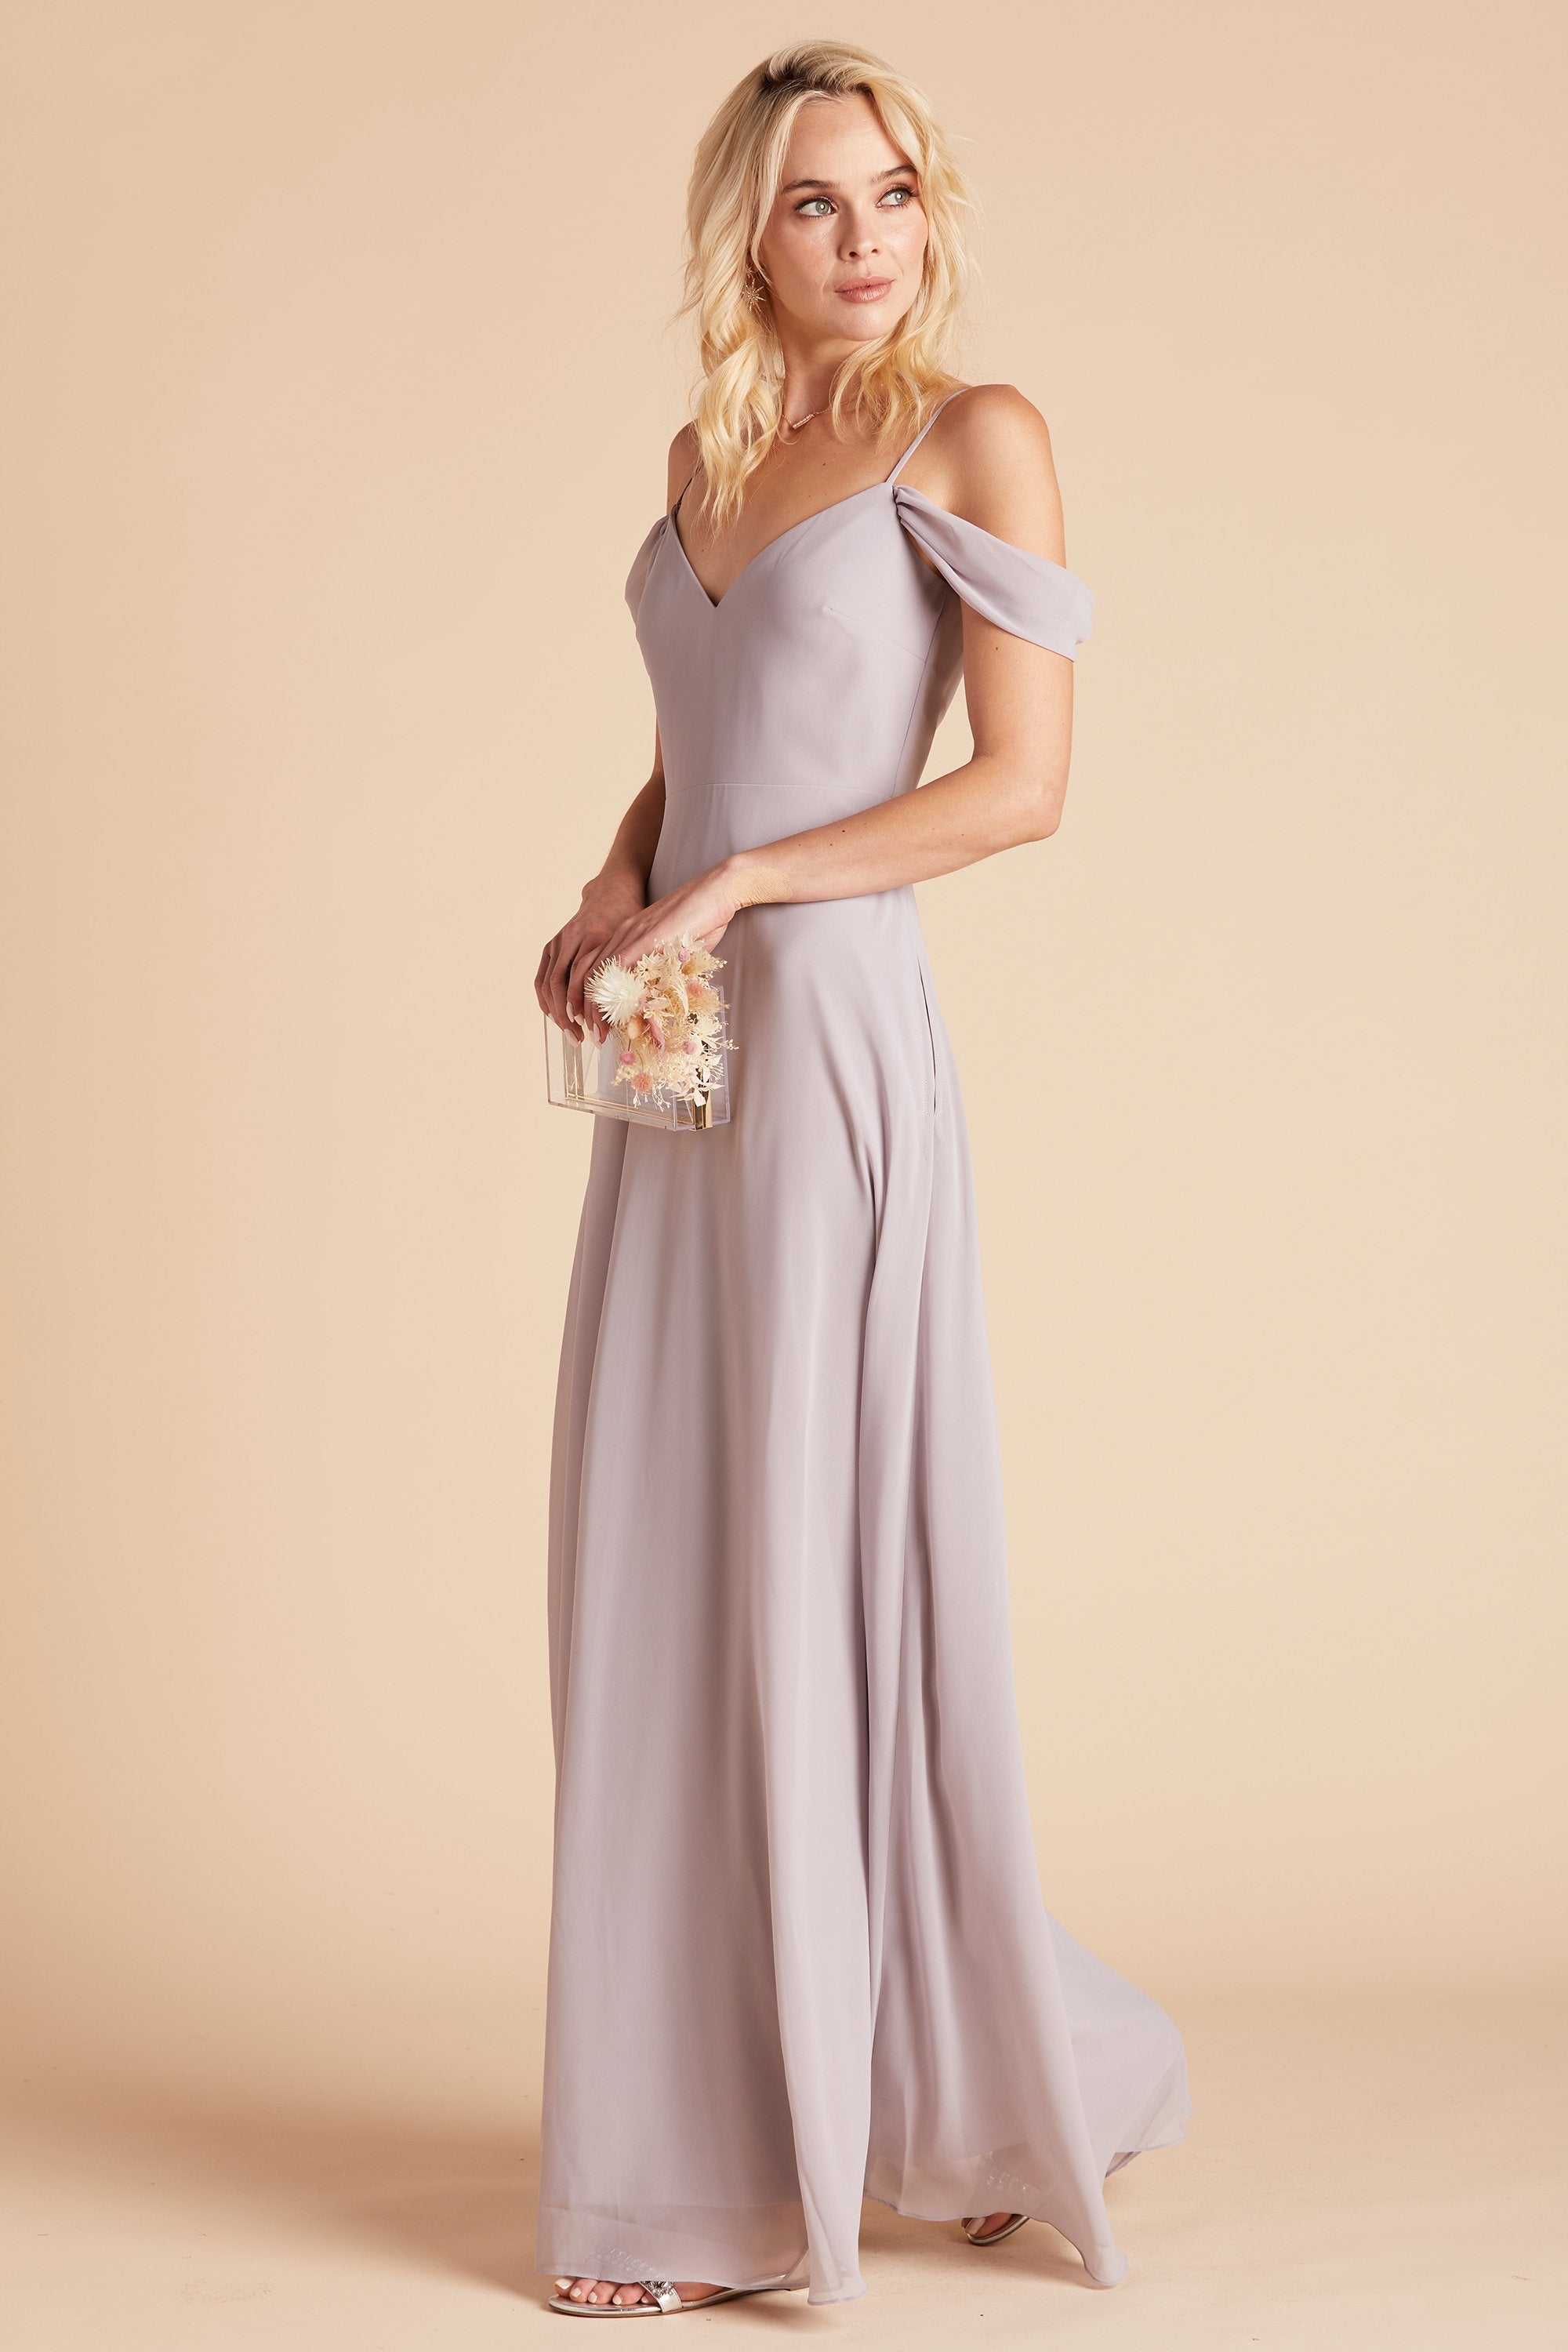 Devin convertible bridesmaids dress in lilac purple chiffon by Birdy Grey, front view